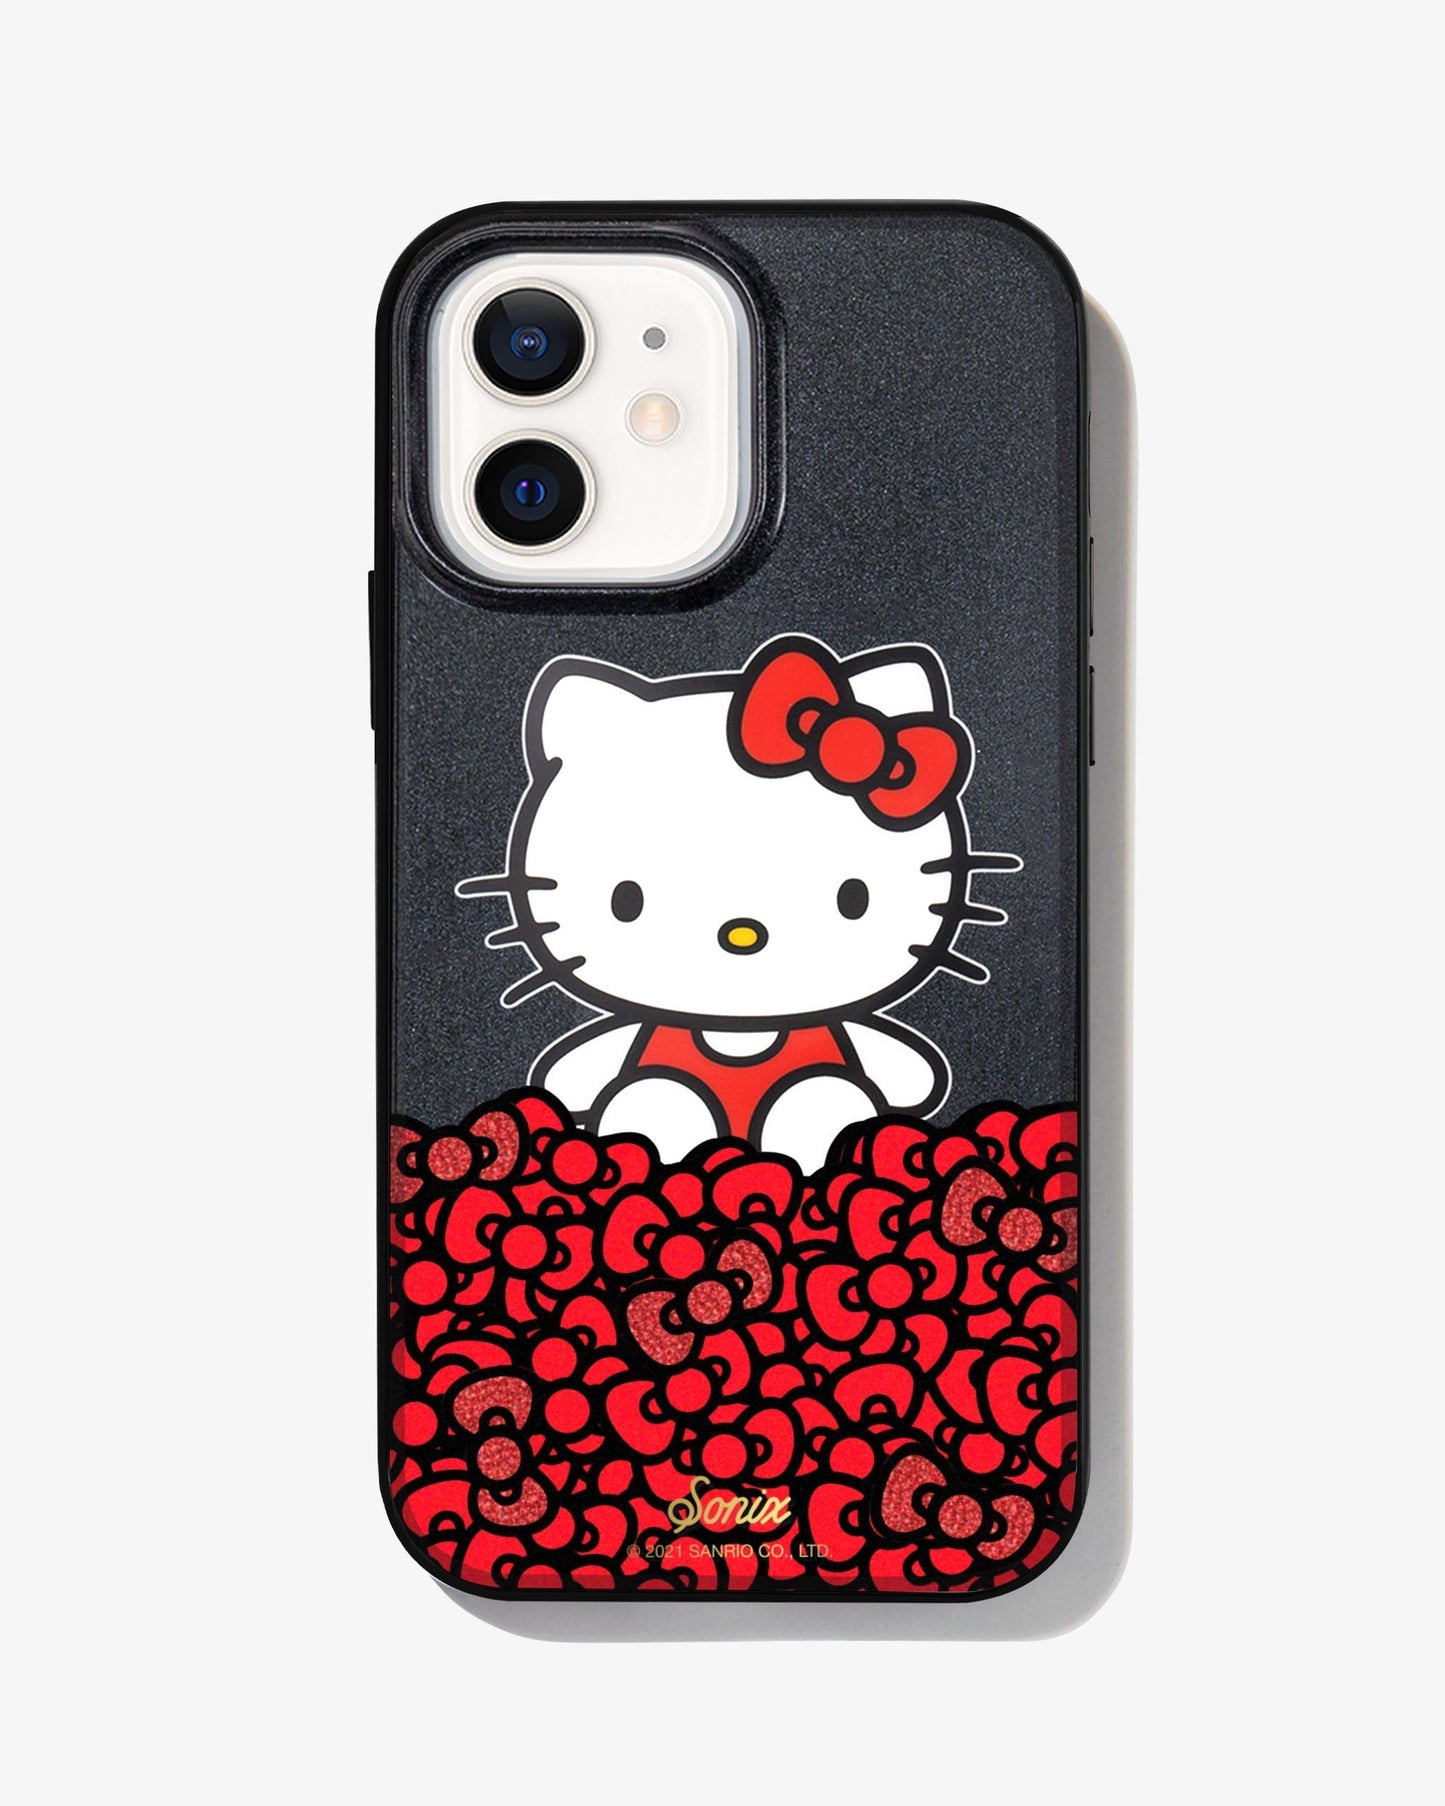 black glitter and Hello Kitty sitting on a bundle of her iconic red bows shown on a iphone 12